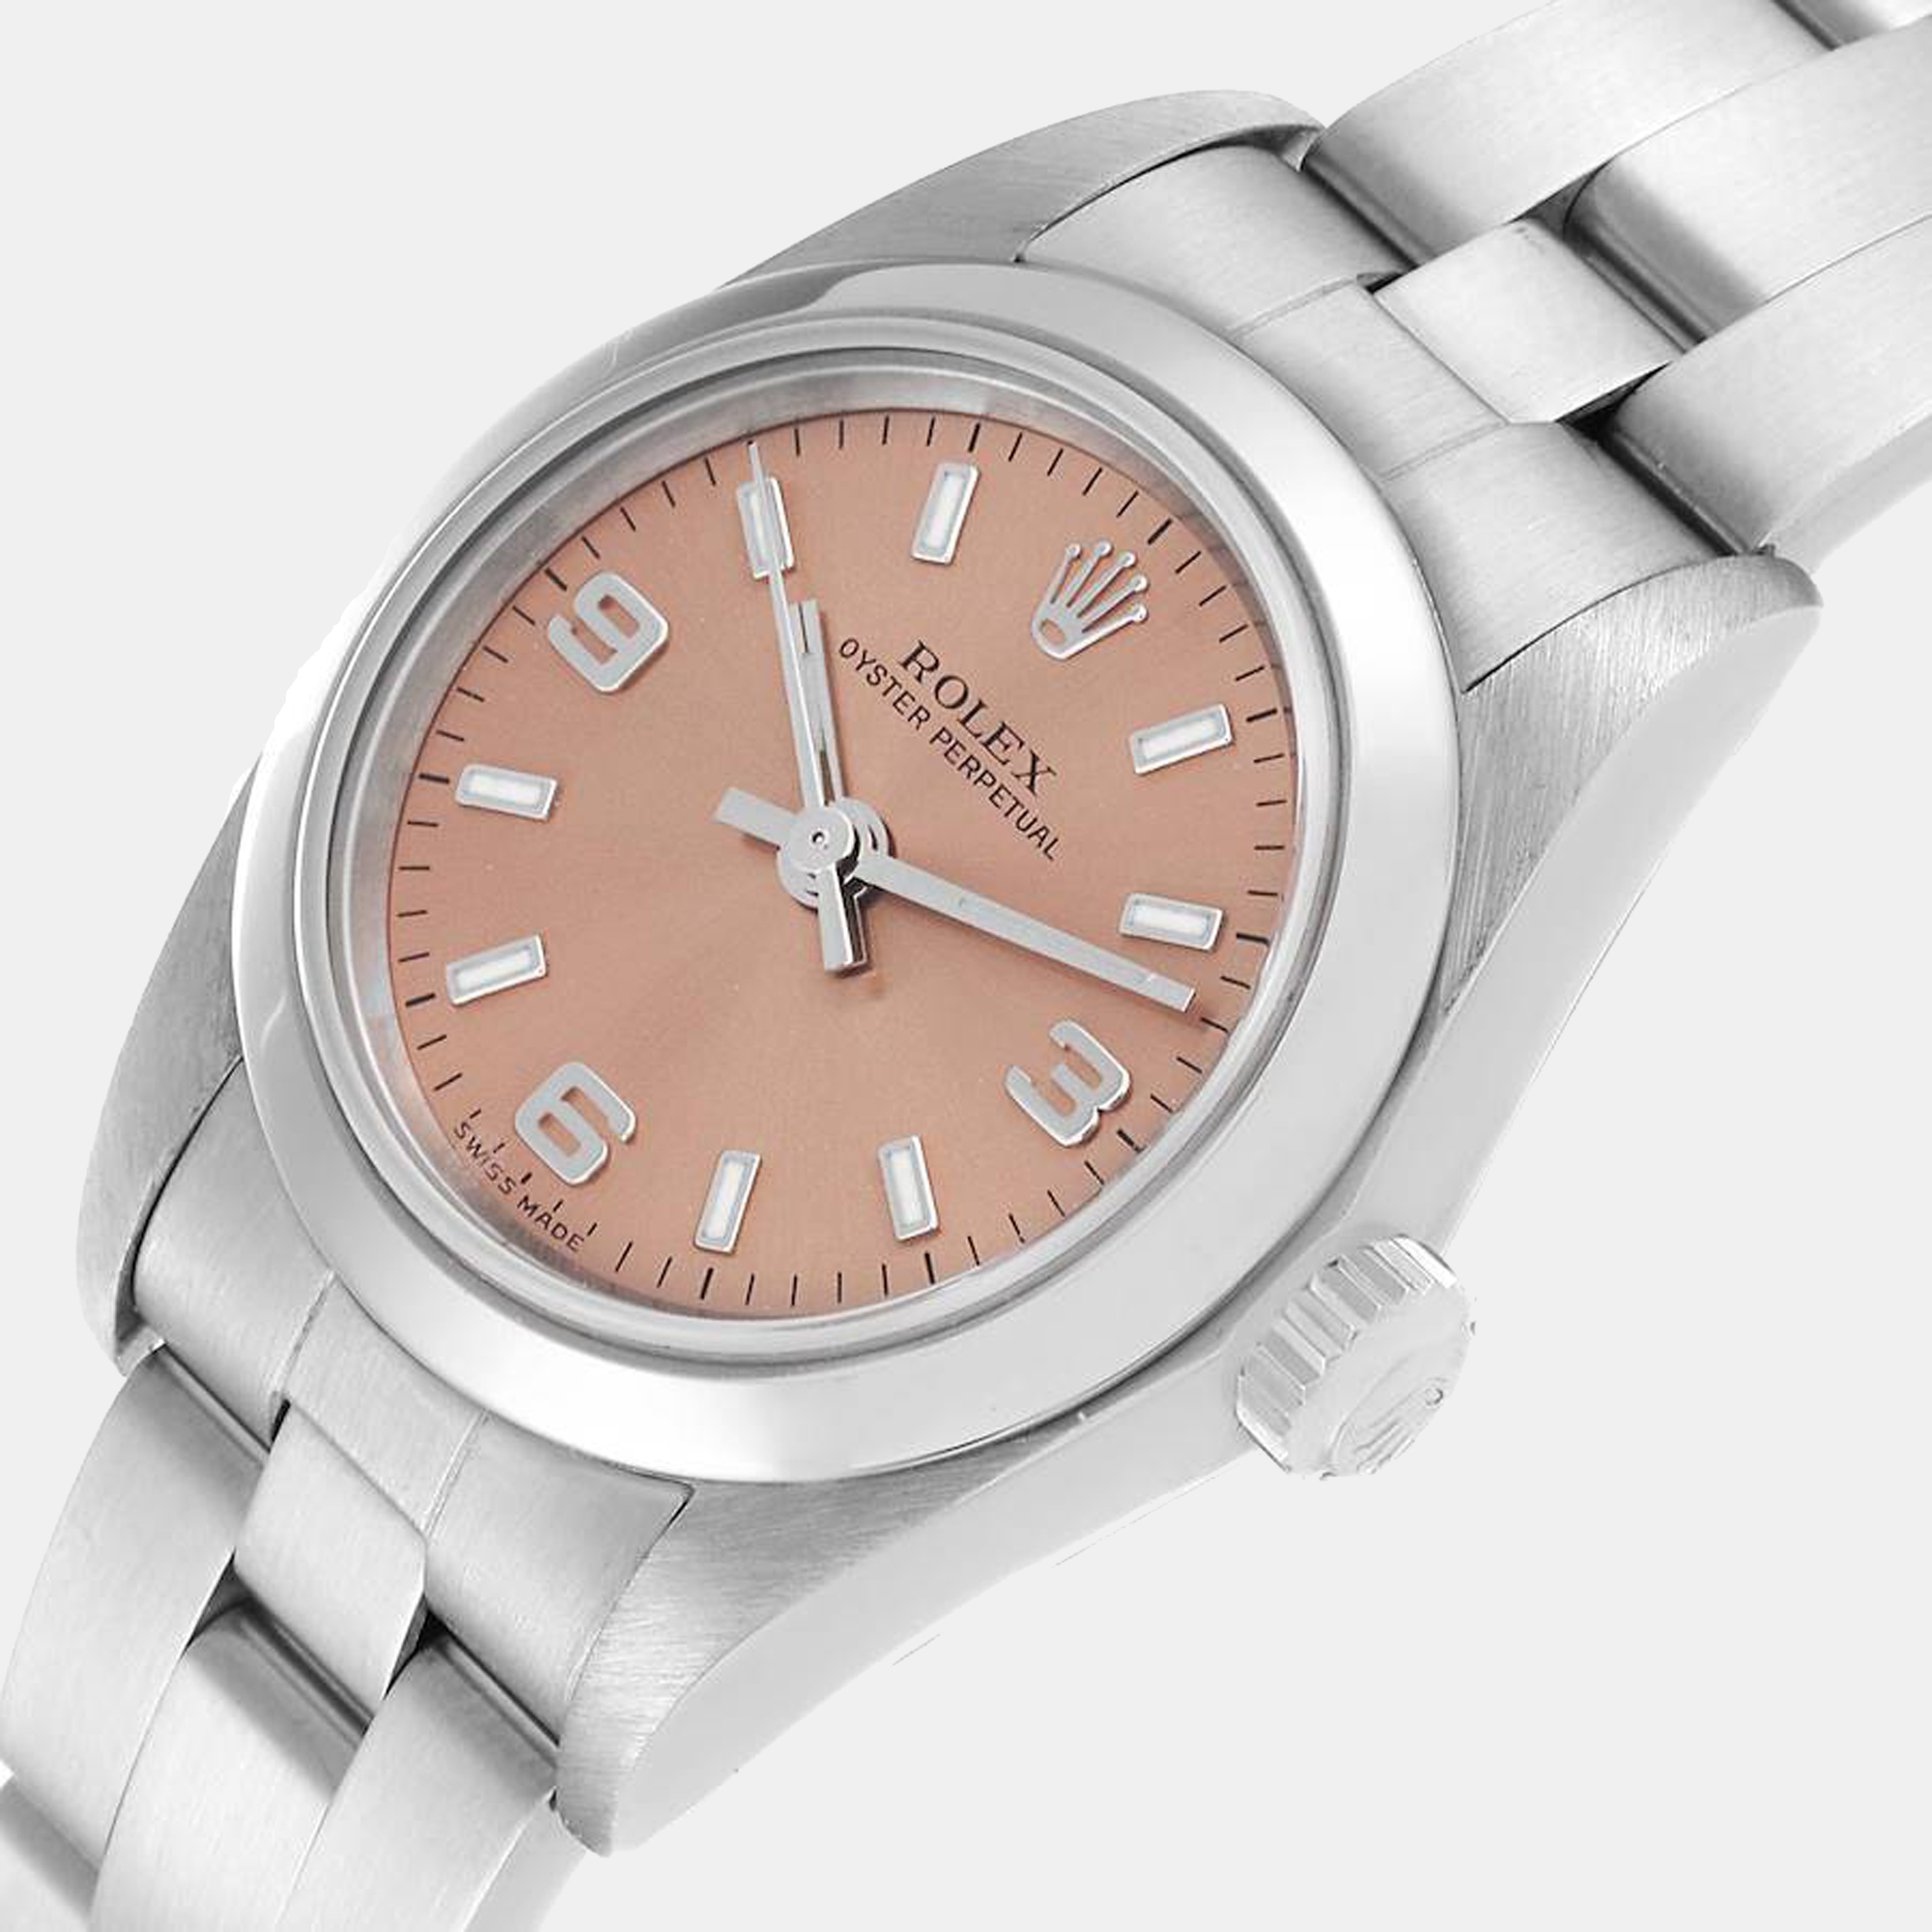 

Rolex Pink Stainless Steel Oyster Perpetual 76080 Women's Wristwatch 24 mm